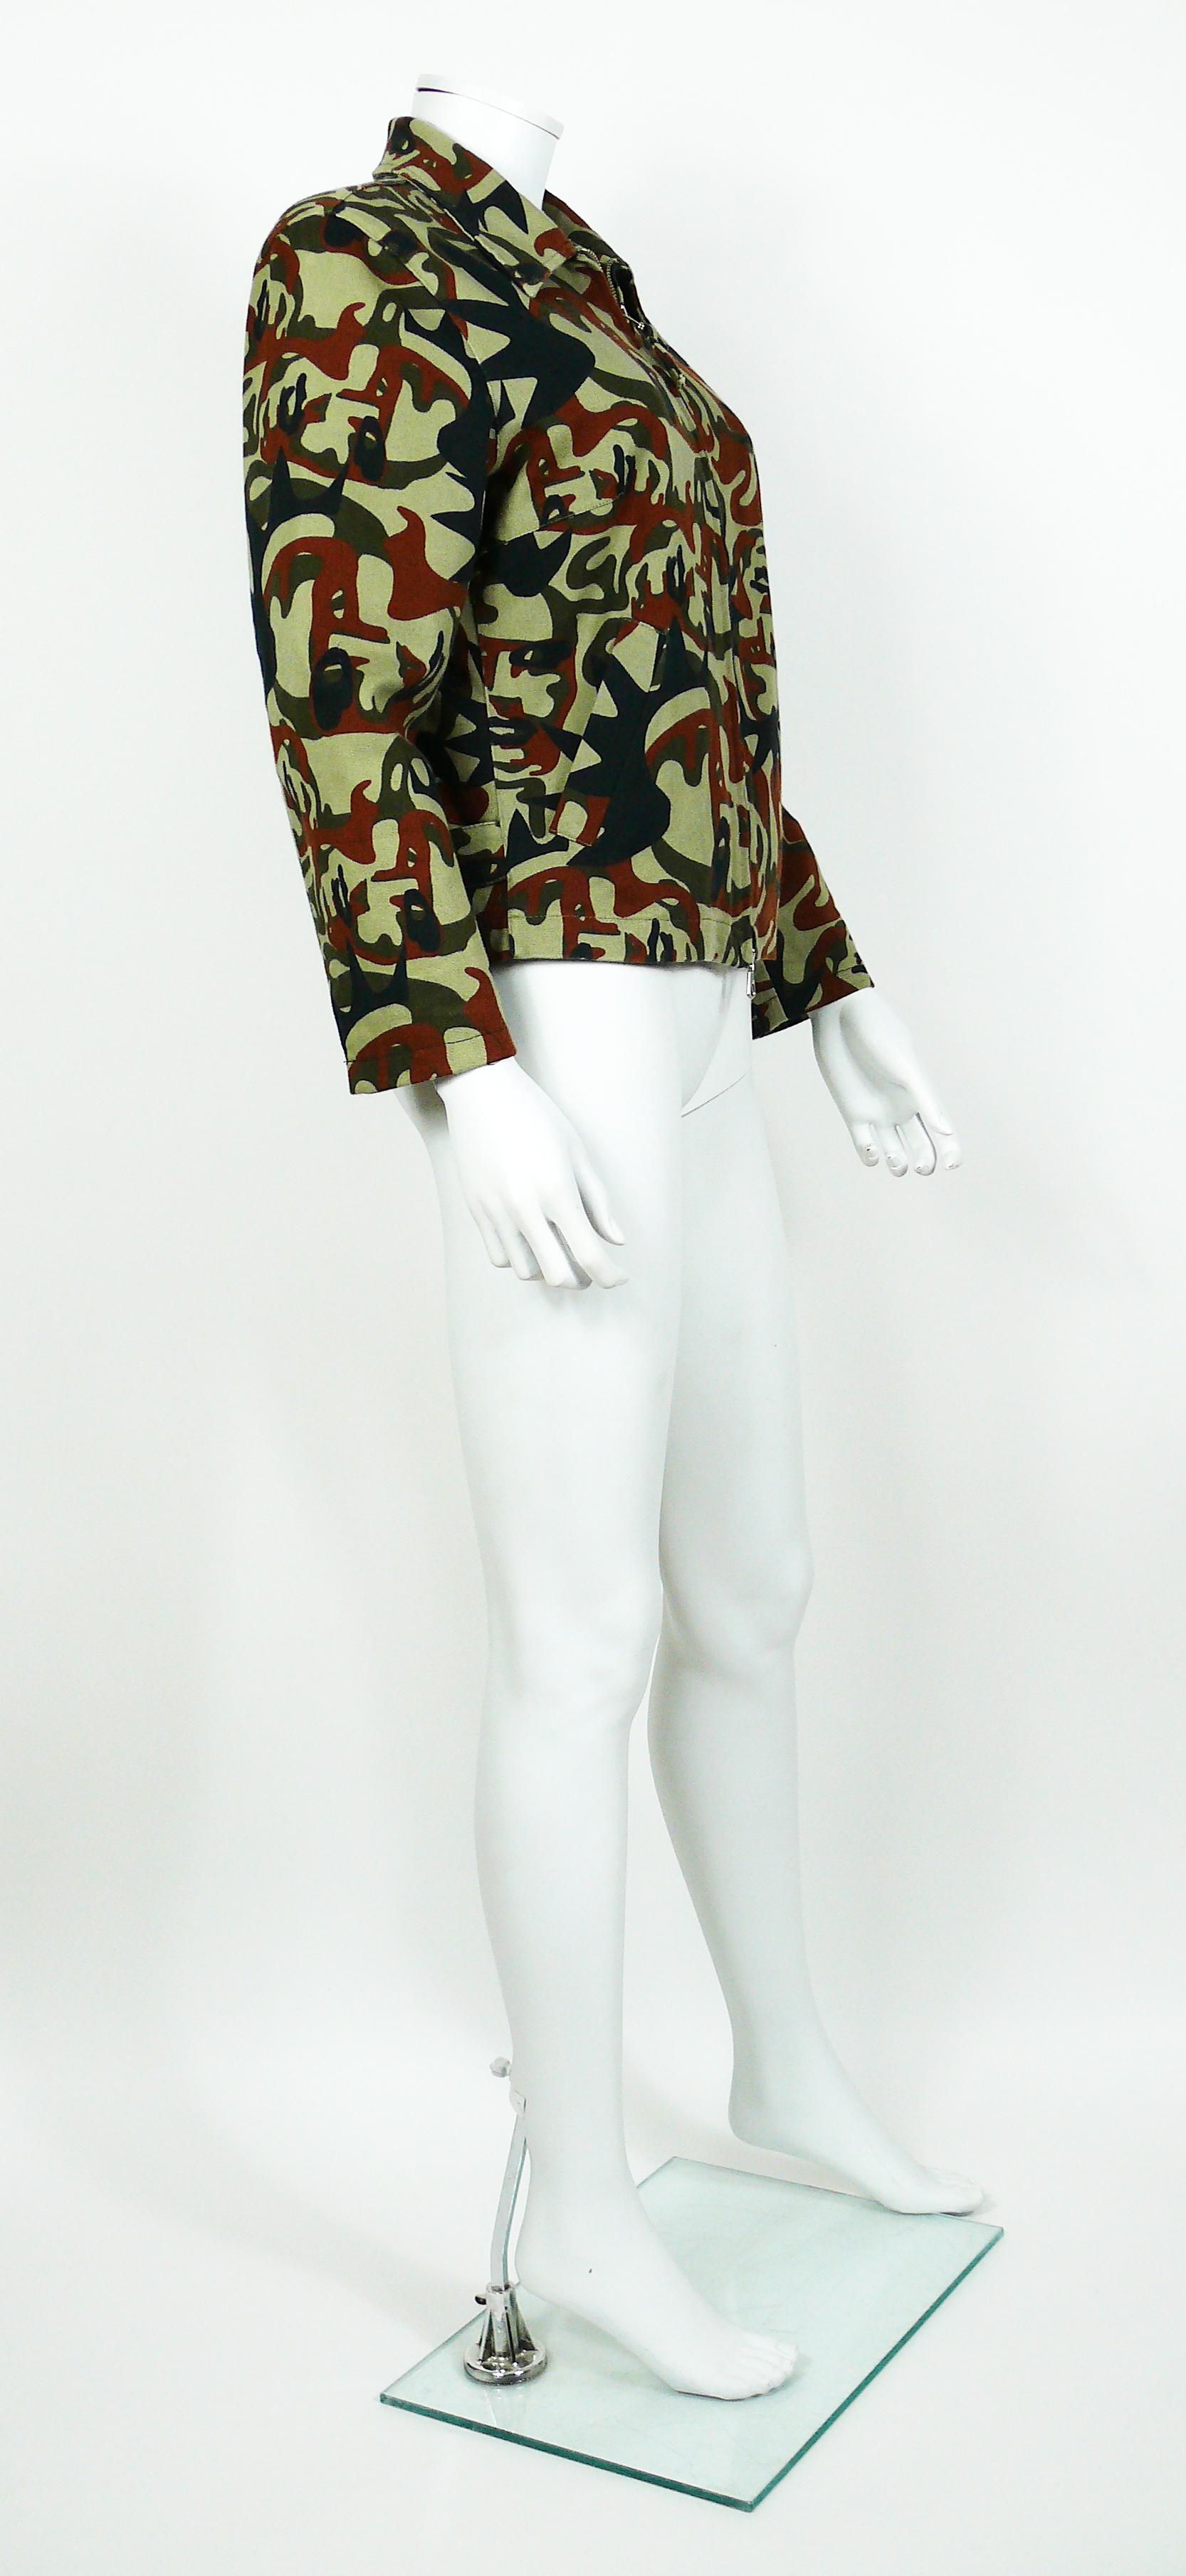 JEAN PAUL GAULTIER vintage jacket featuring a camouflage design with faces.

This jacket features :
- Classic collar.
- Front zip closure.
- Long sleeves.
- Two pockets.
- Fully lined.

Label reads JPG JEAN'S DONNA.
Made in Italy.

Size tag reads :